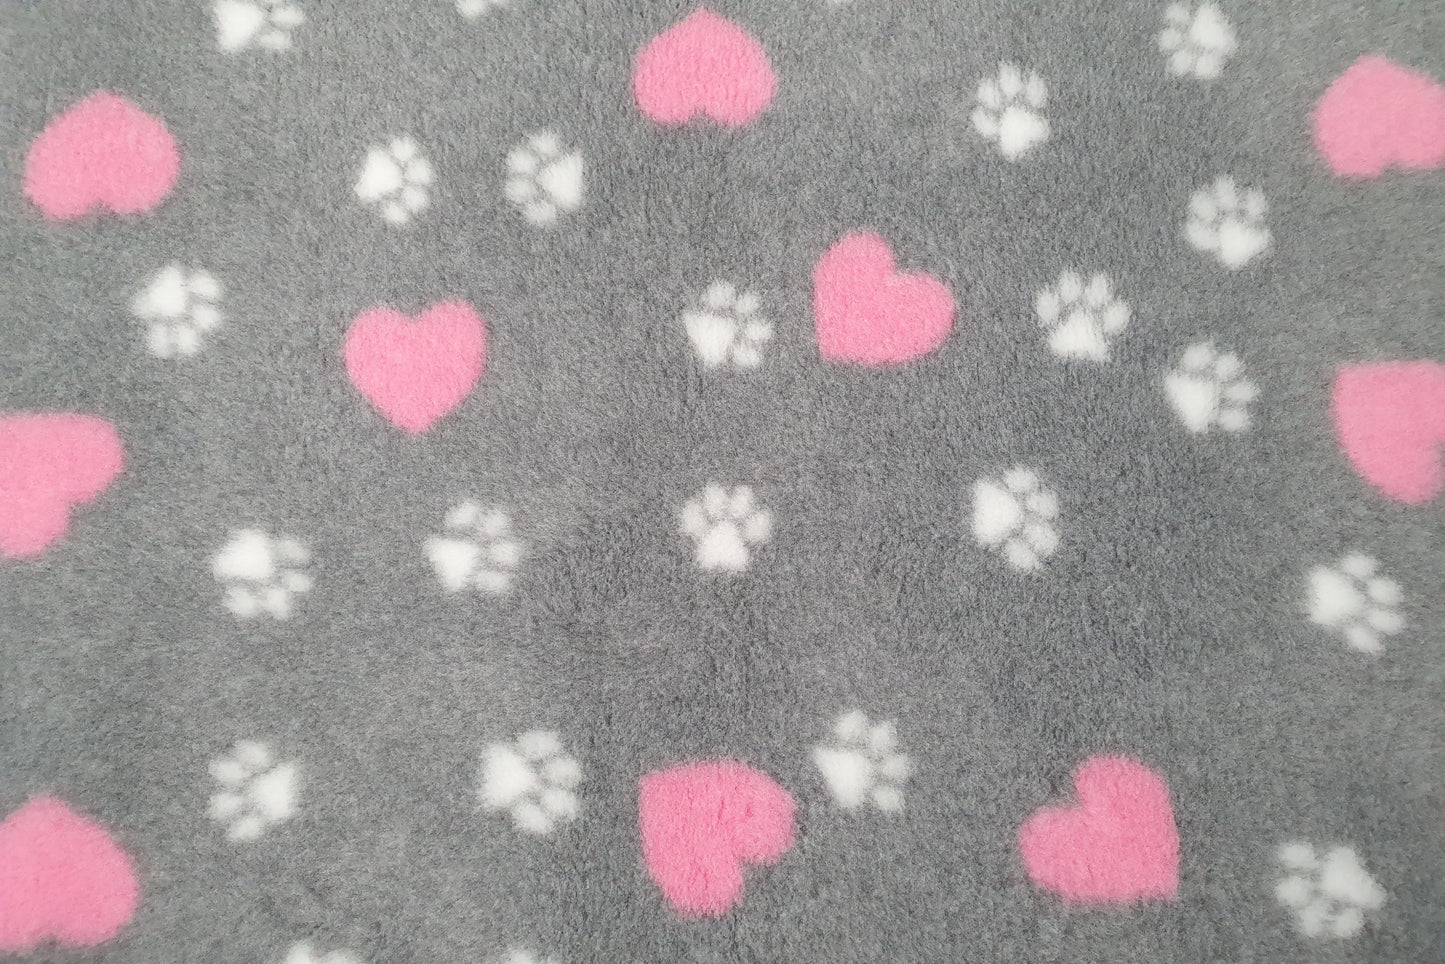 Vet Bed - Rubber Backed - Grey with White Paws and Pink Hearts